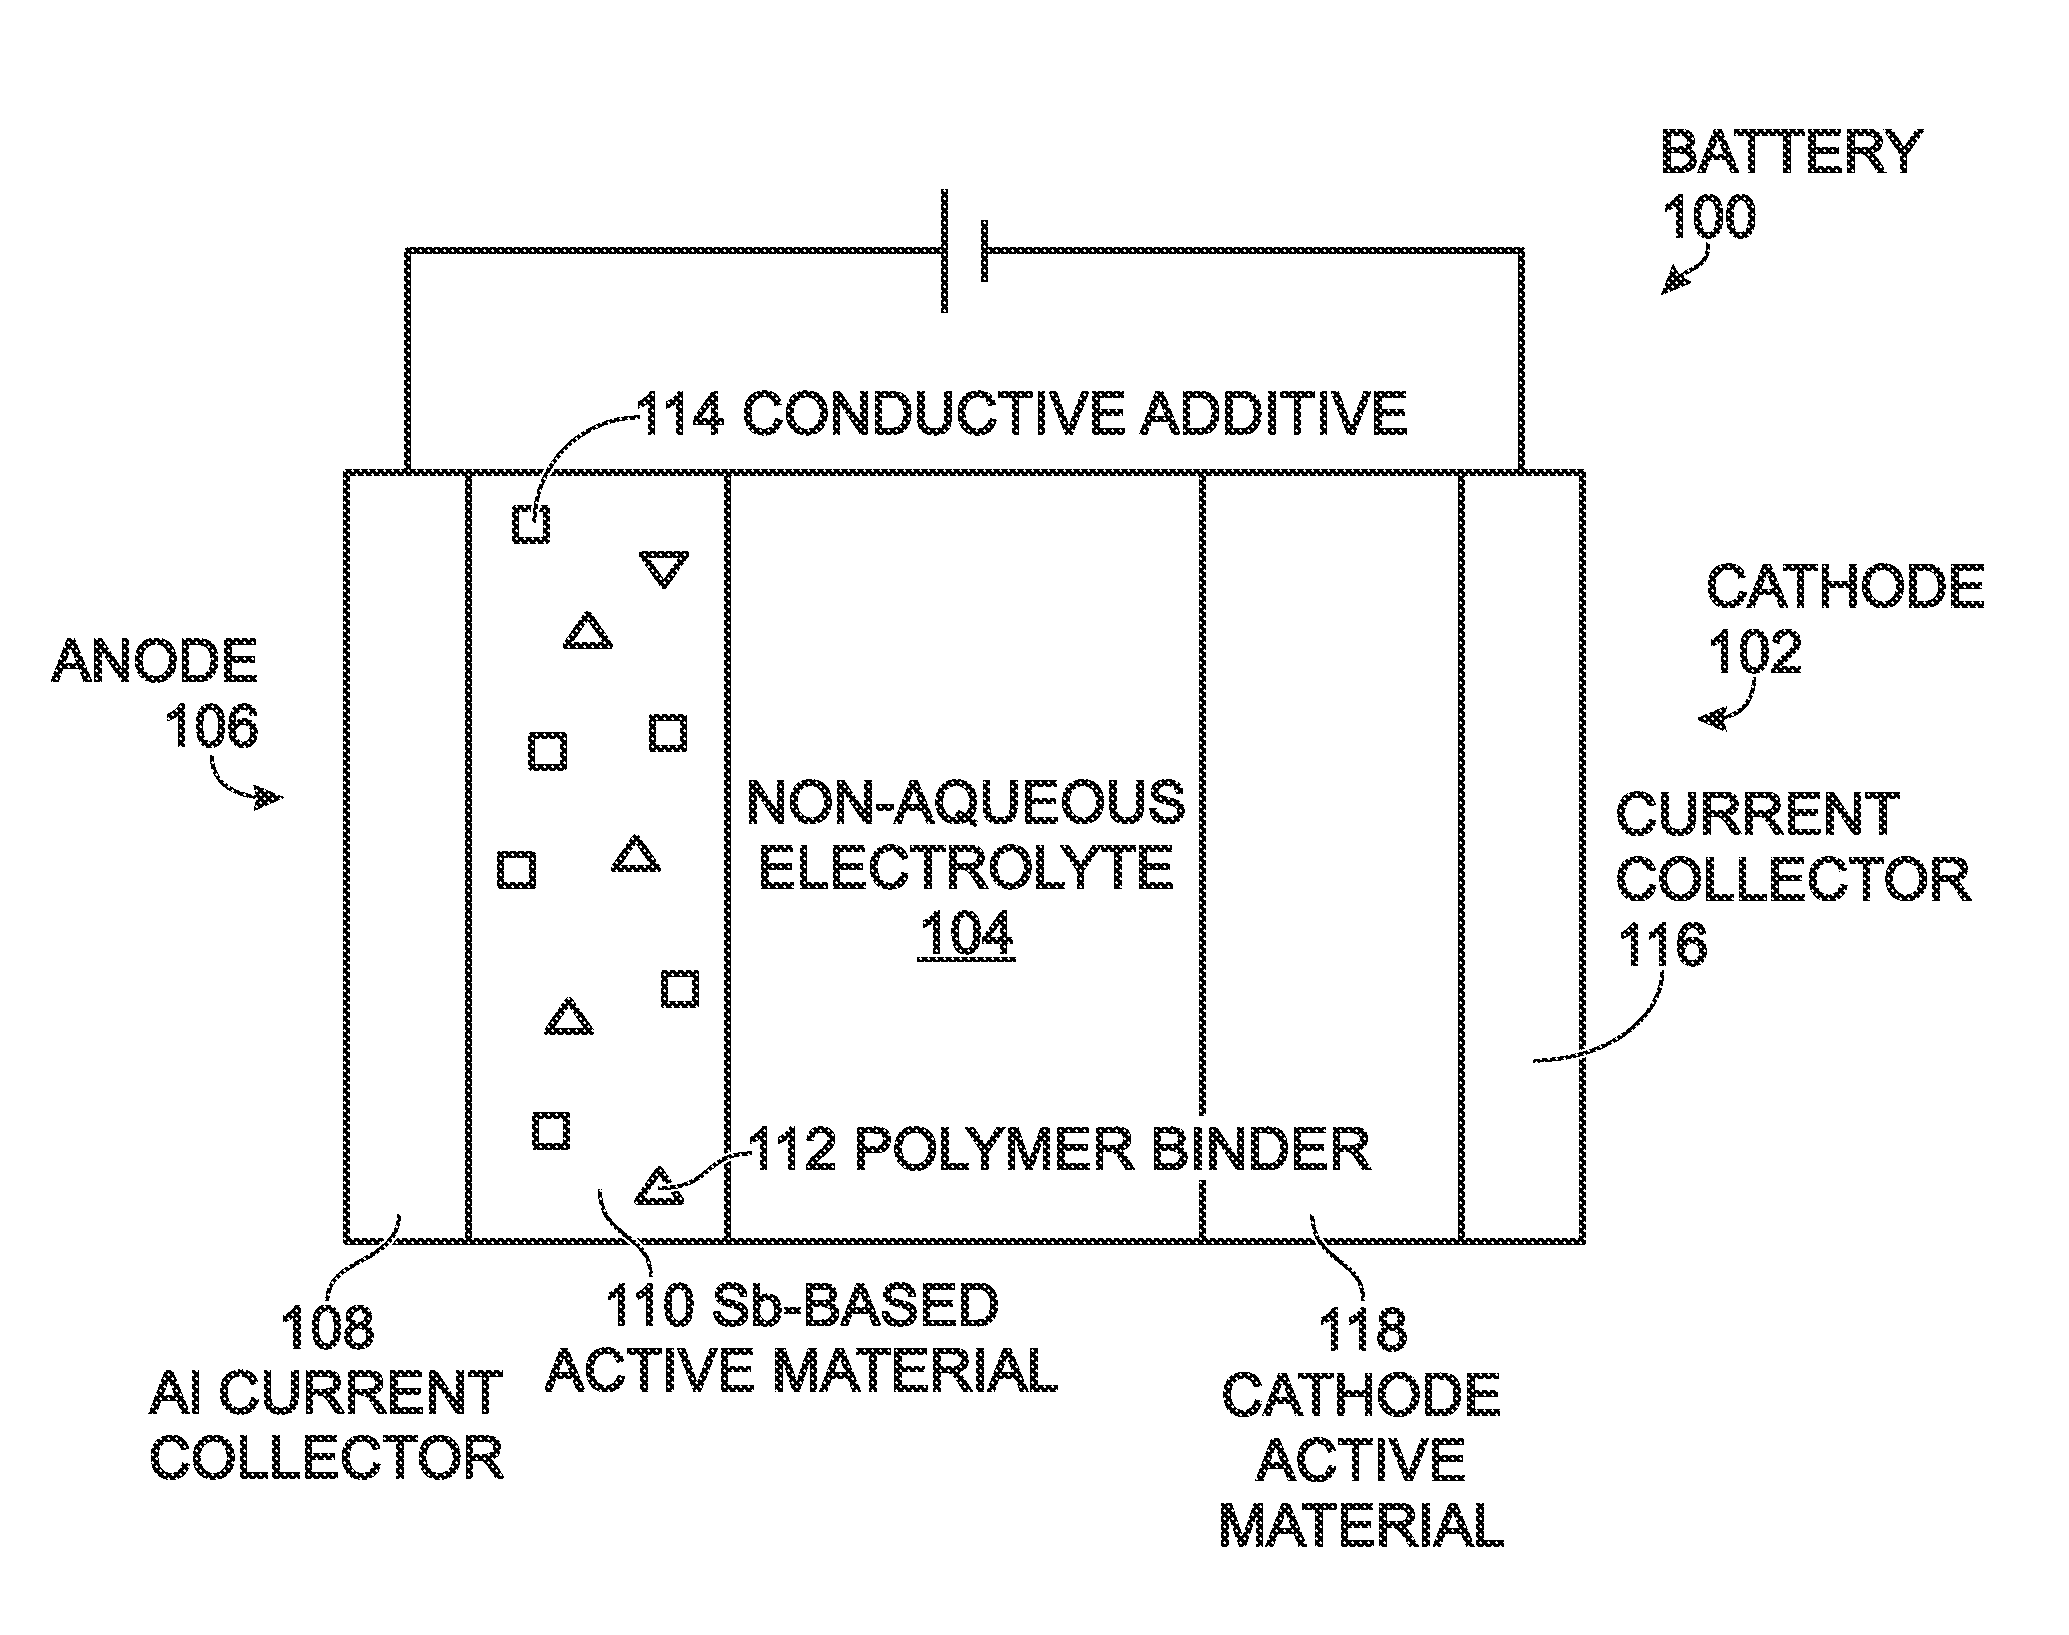 Antimony-Based Anode on Aluminum Current Collector